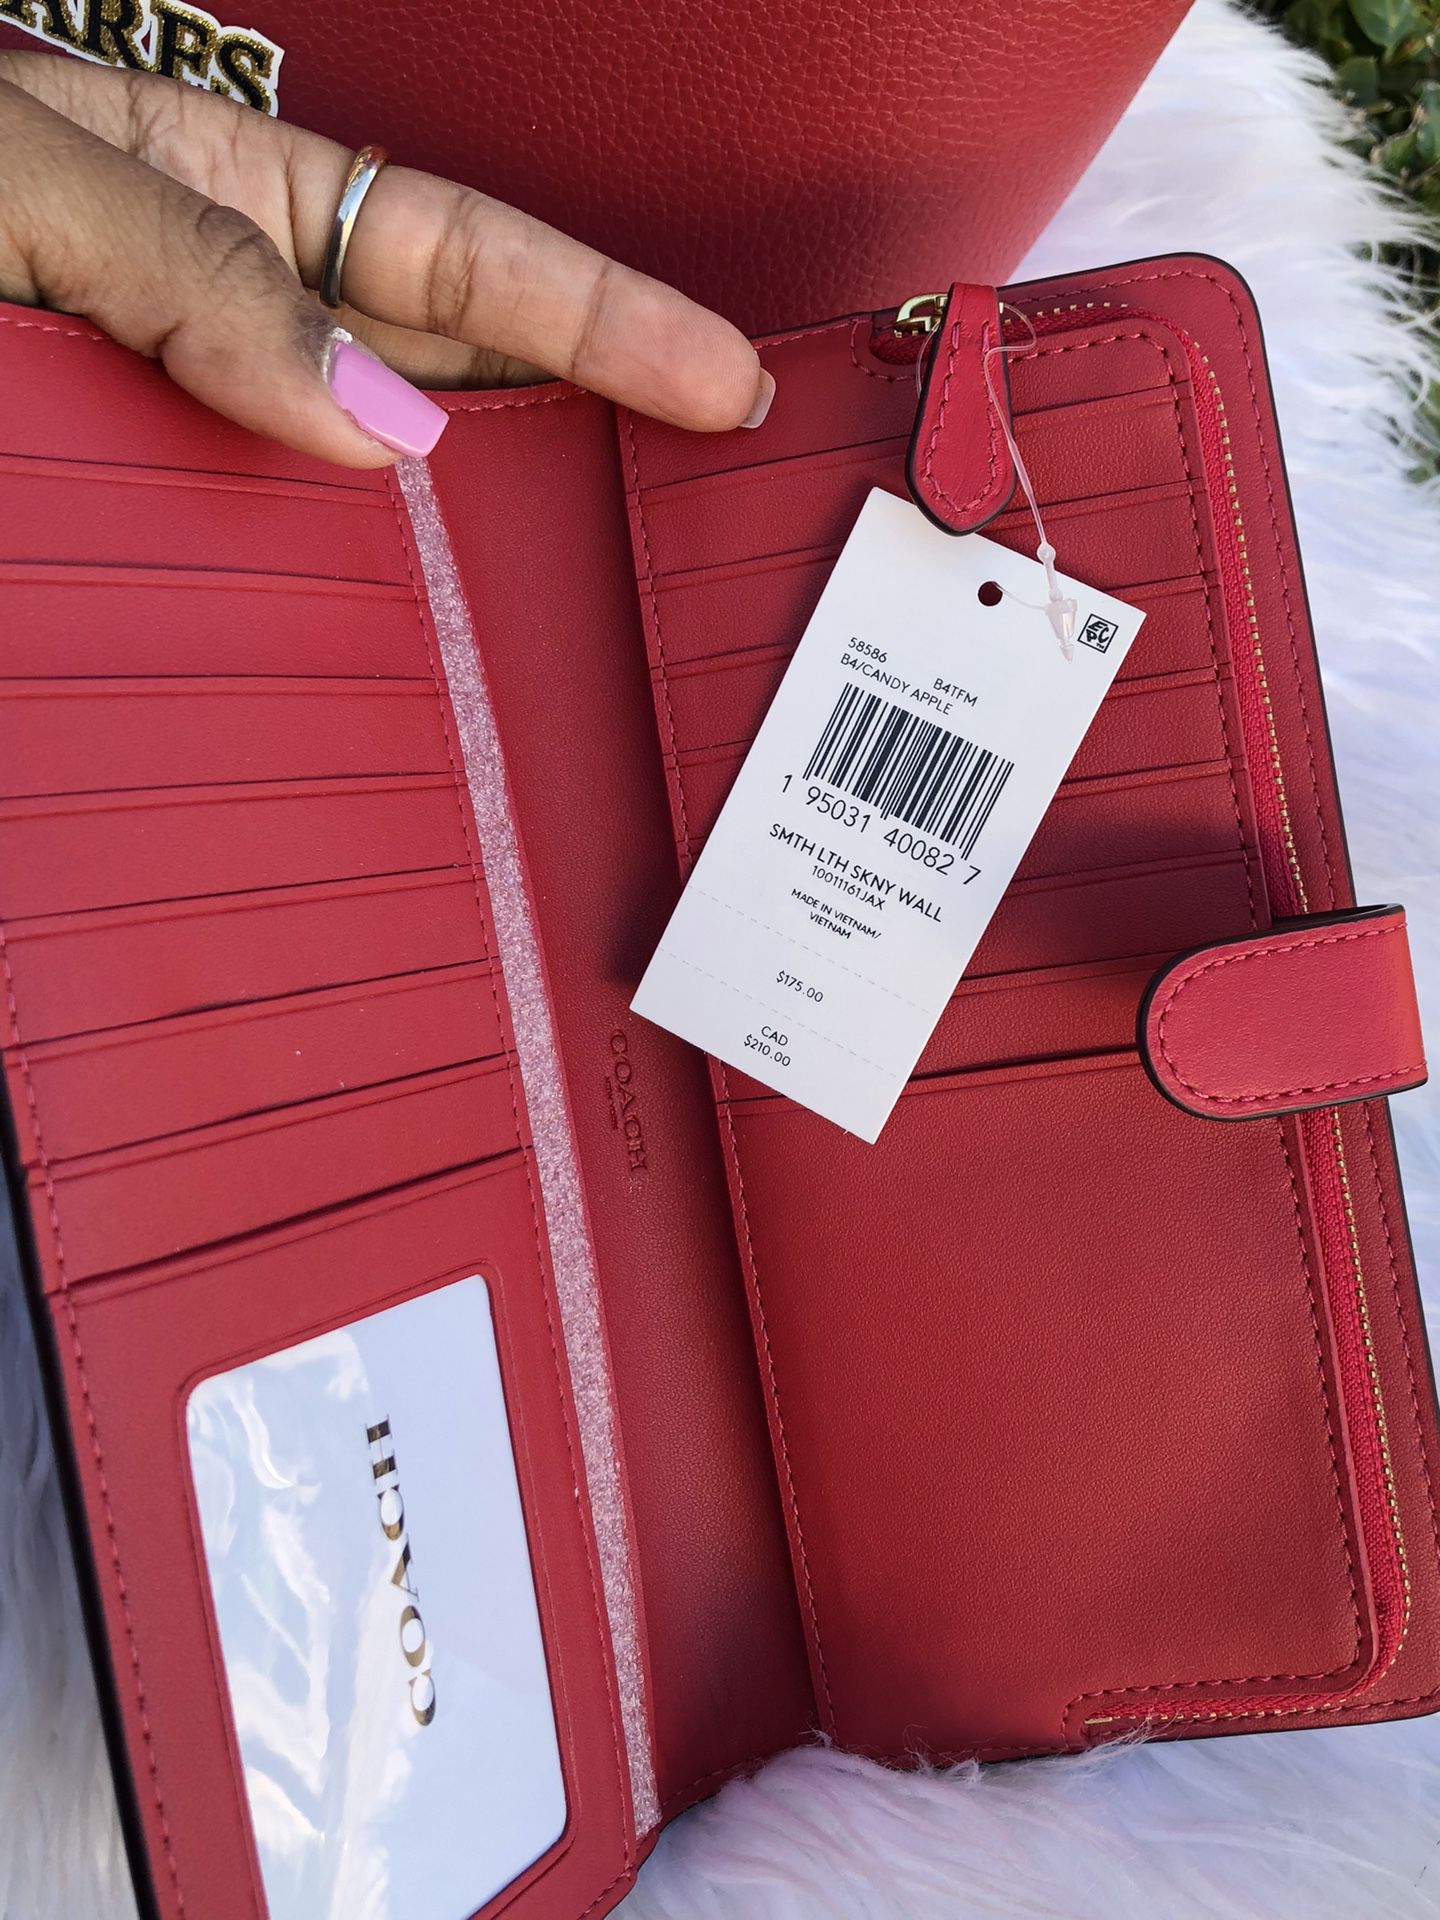 New Coach Wallet Candy Apple for Sale in Haltom City, TX - OfferUp